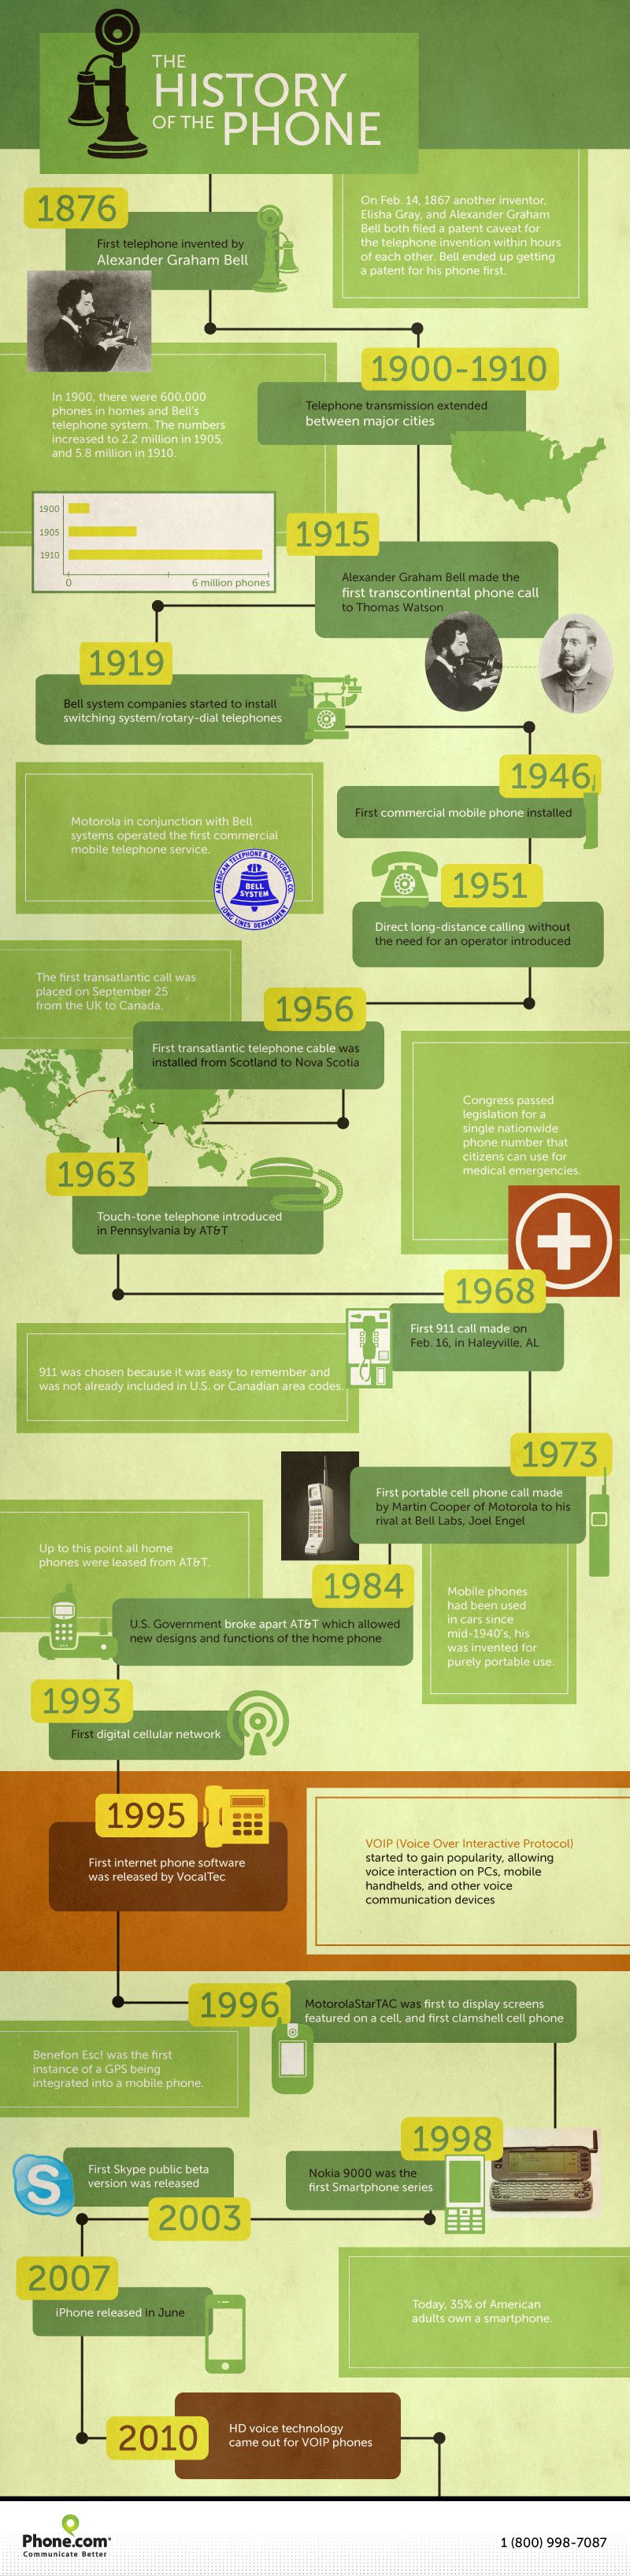 History of the Phone